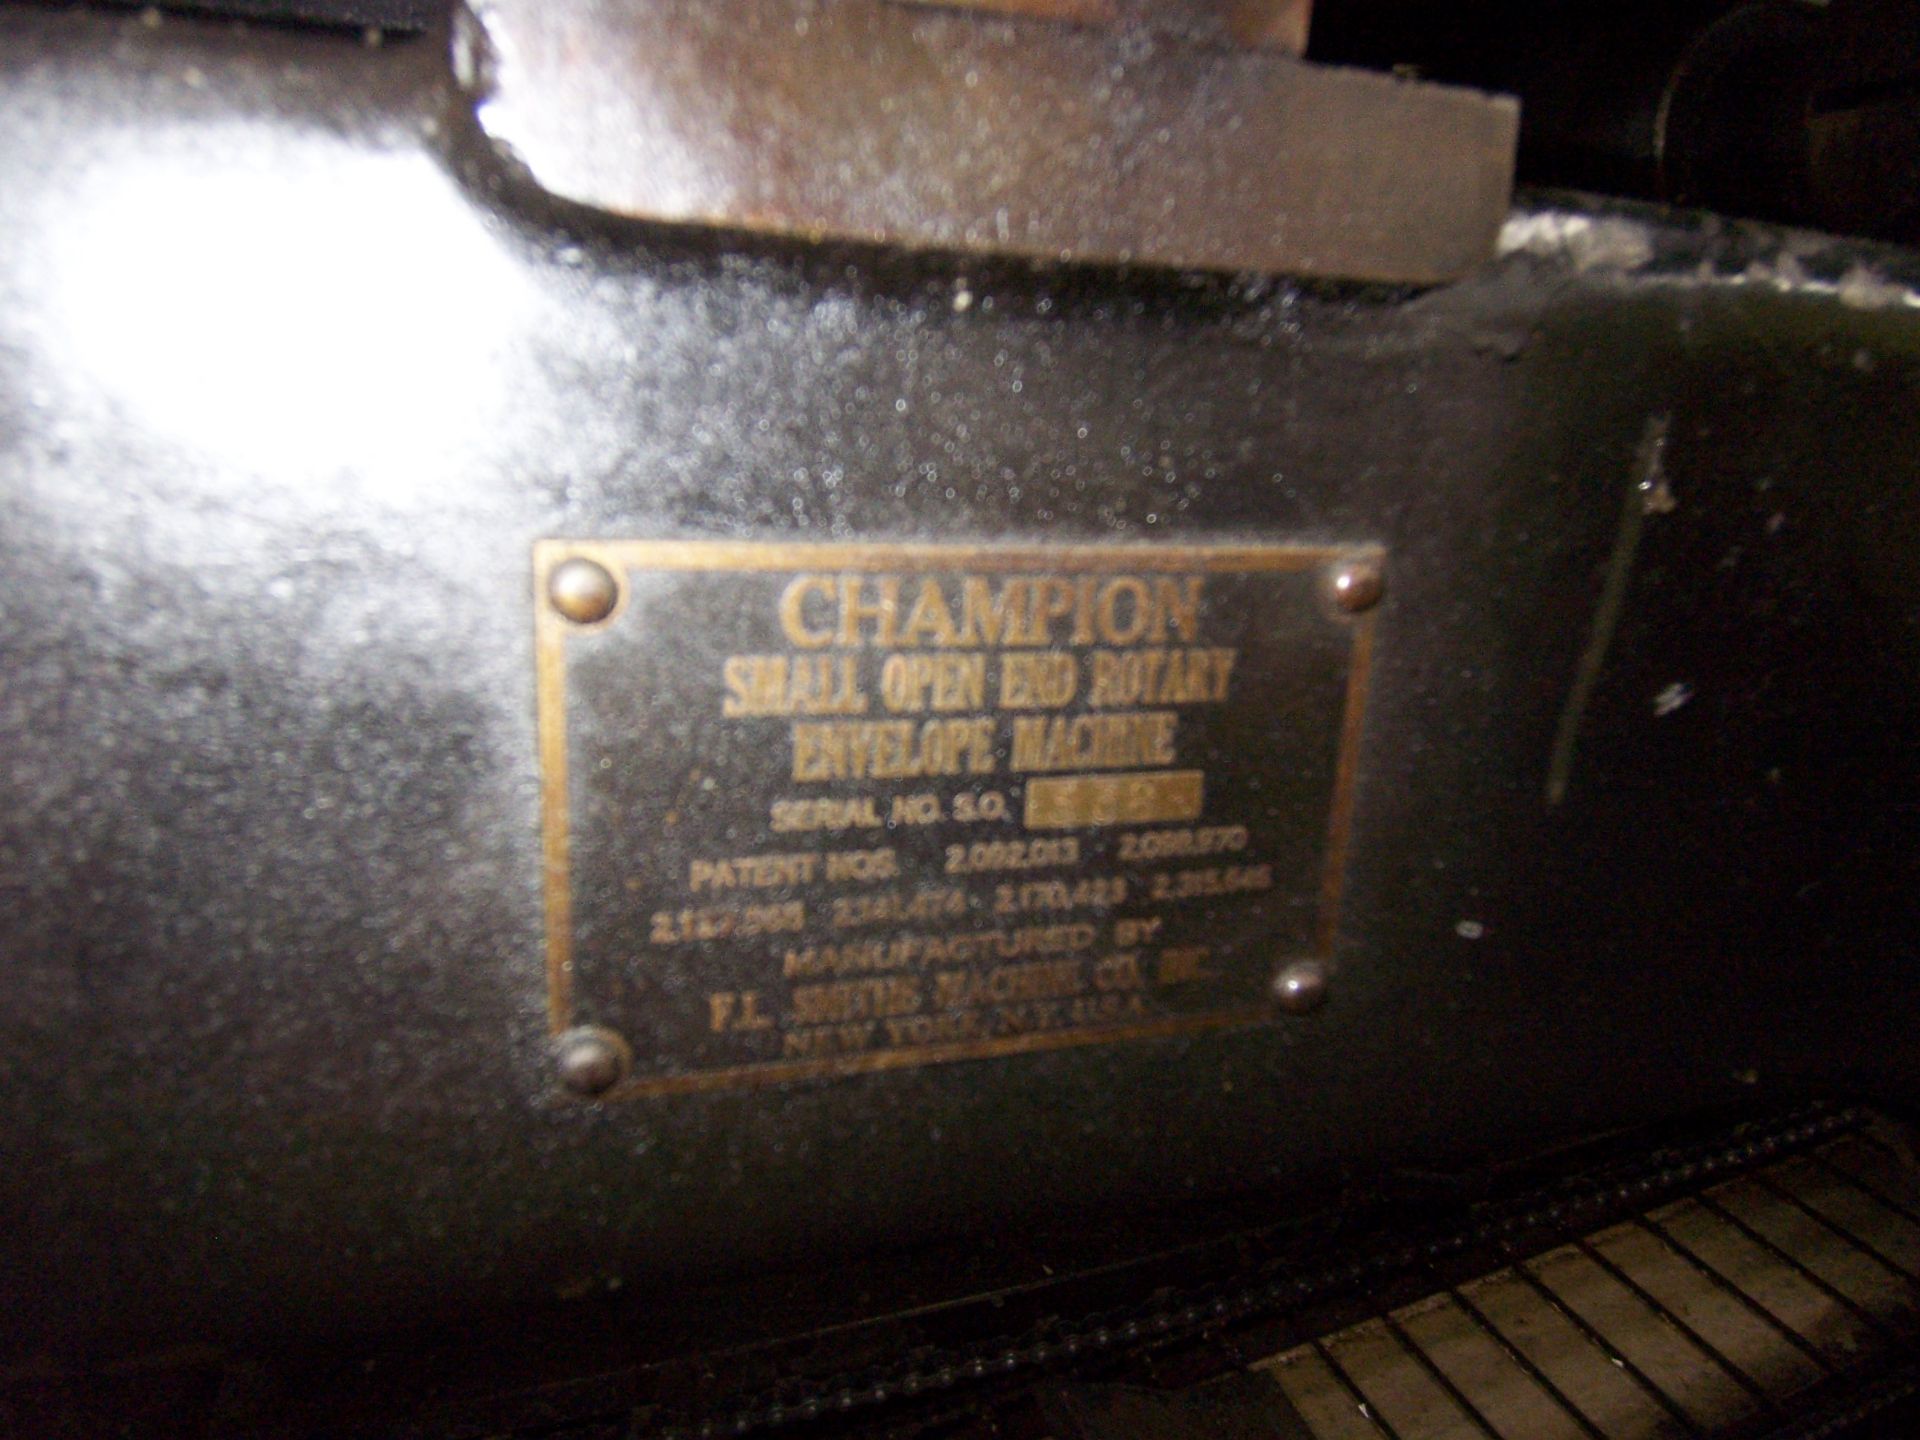 F.L. SMITHE CHAMPION S.O. SMALL OPEN END ROTARY ENVELOPE MACHINE, S/N: 338 - Image 6 of 6